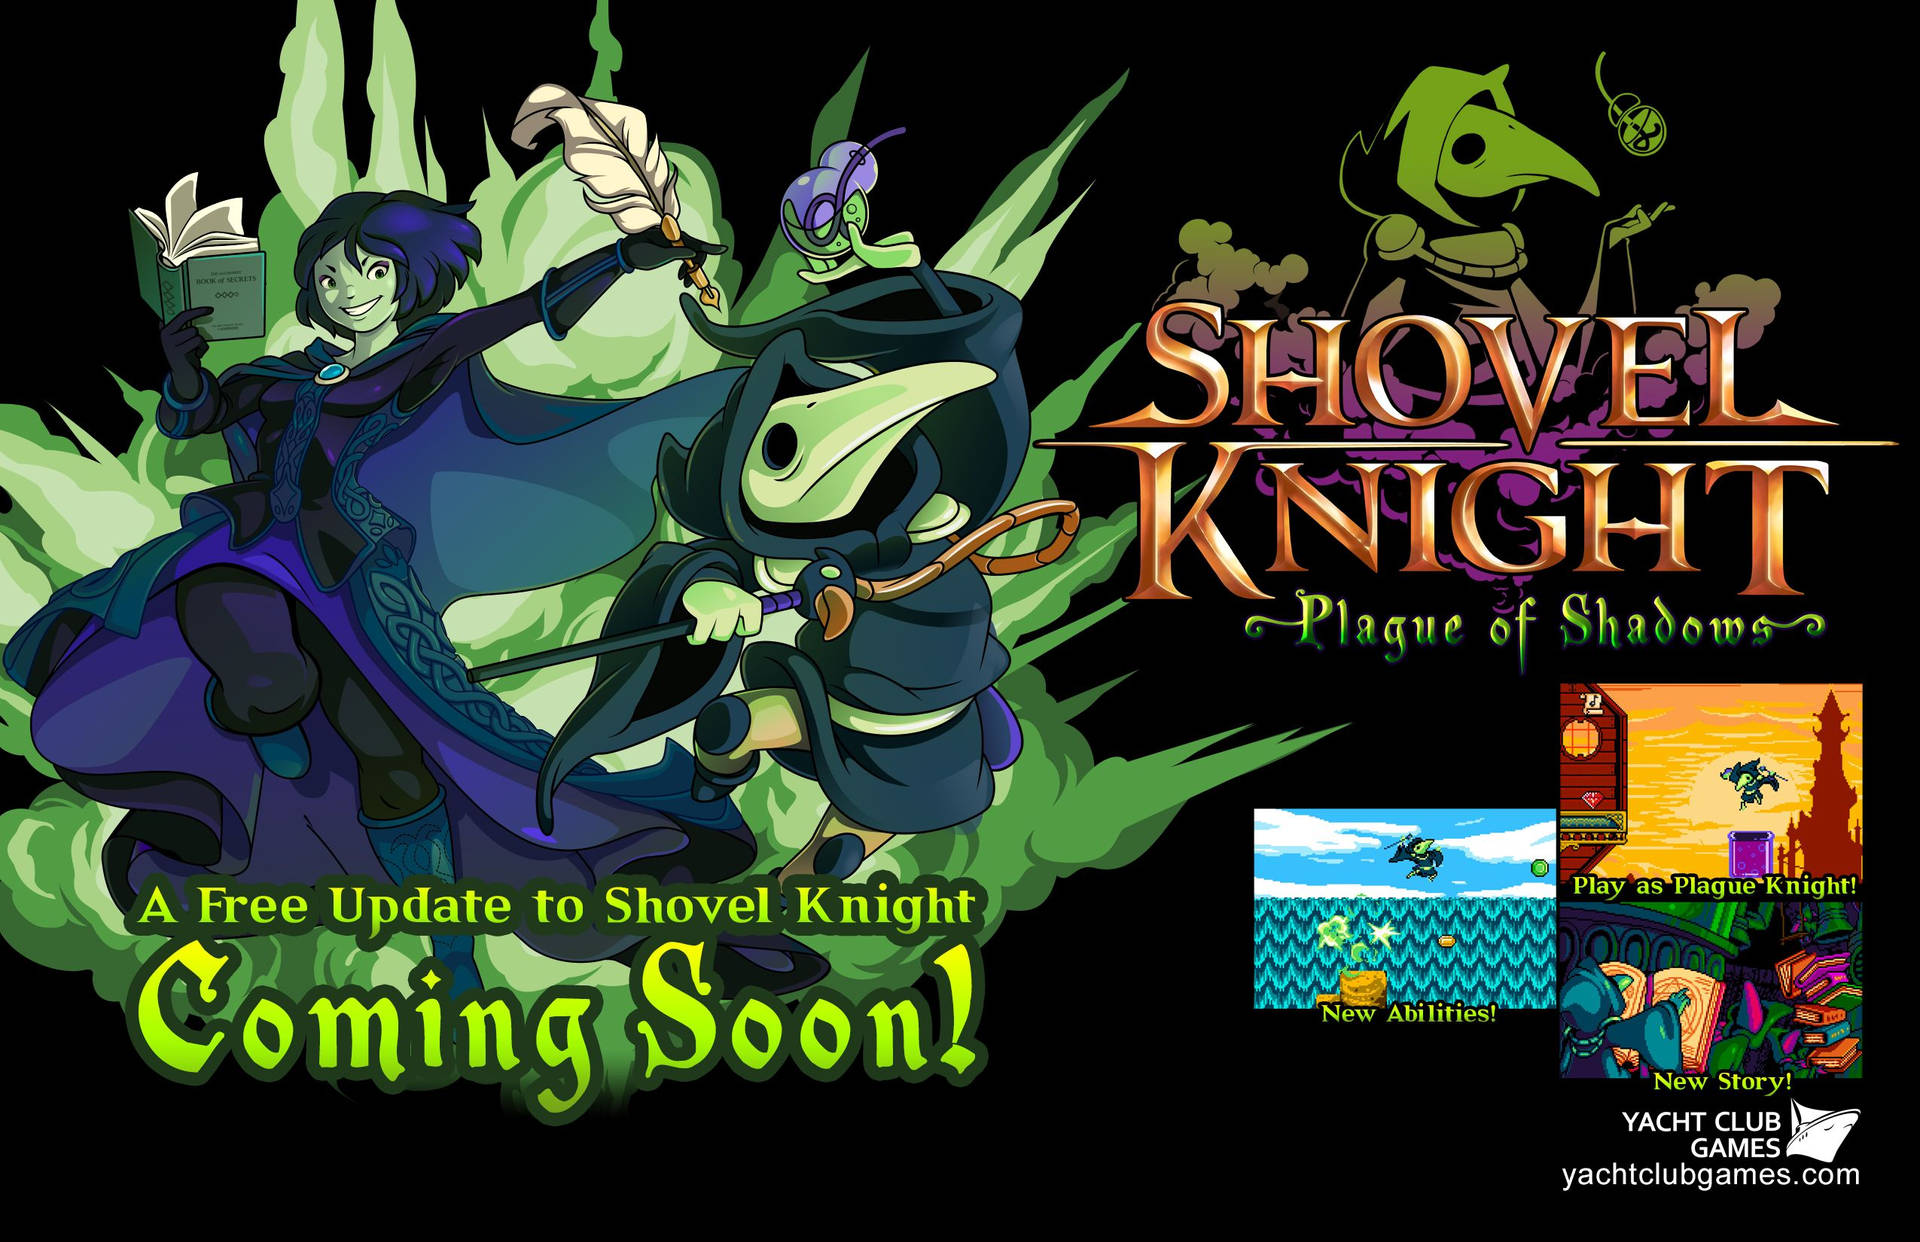 Shovel Knight Game Plague Of Shadows Background